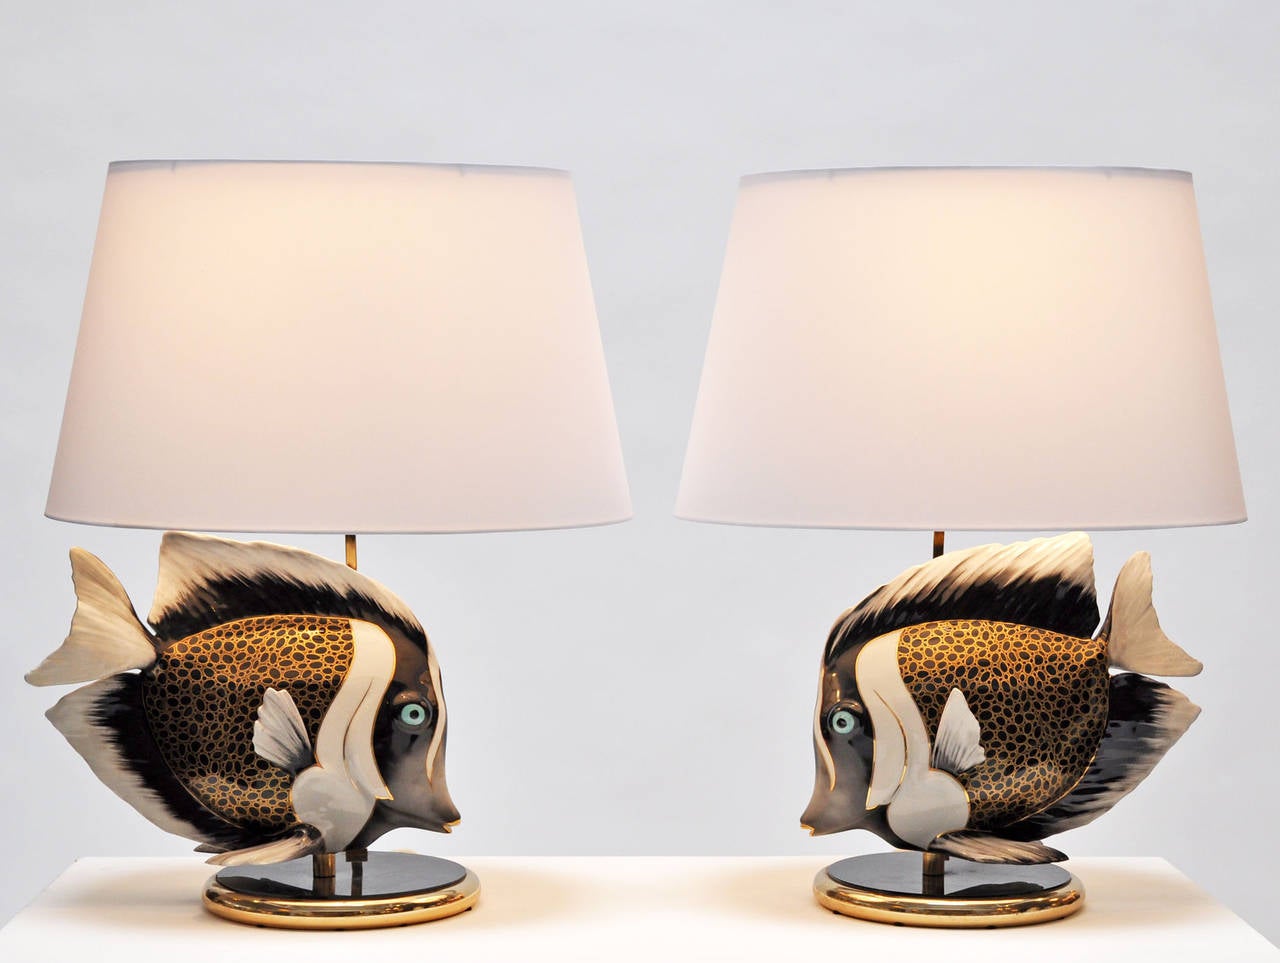 Pair of 1970s porcelain fish lamps. Signed Italy. The quality and details are exquisite. New custom oval silk shades with diffusers. 
Price is for the pair. Shades measure: 20